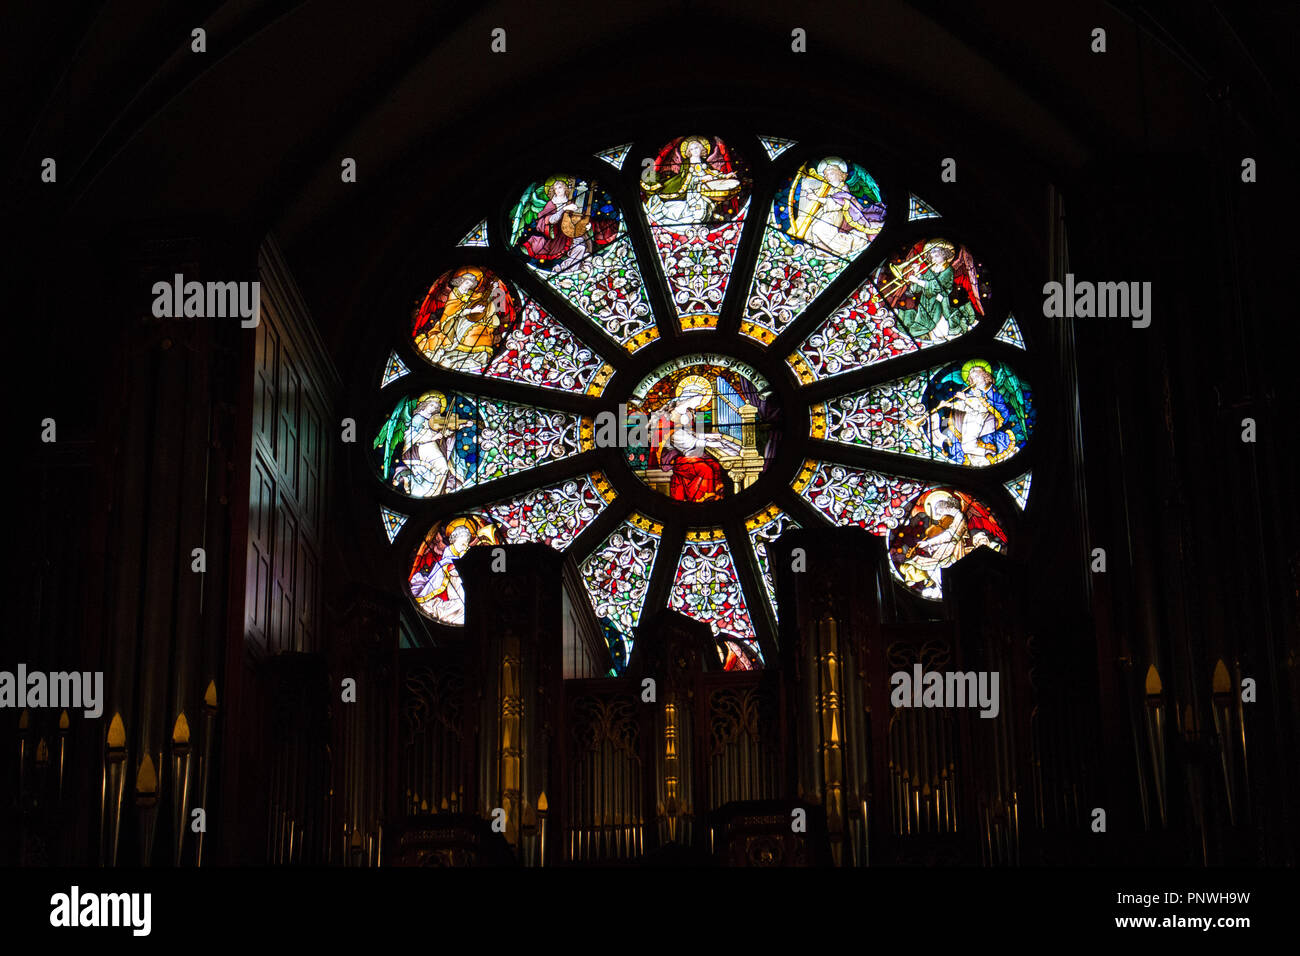 Stained-glass window depicting Saint Cecilia above the organ in the Cathedral of the Madeleine, Salt Lake City, Utah, USA. Stock Photo